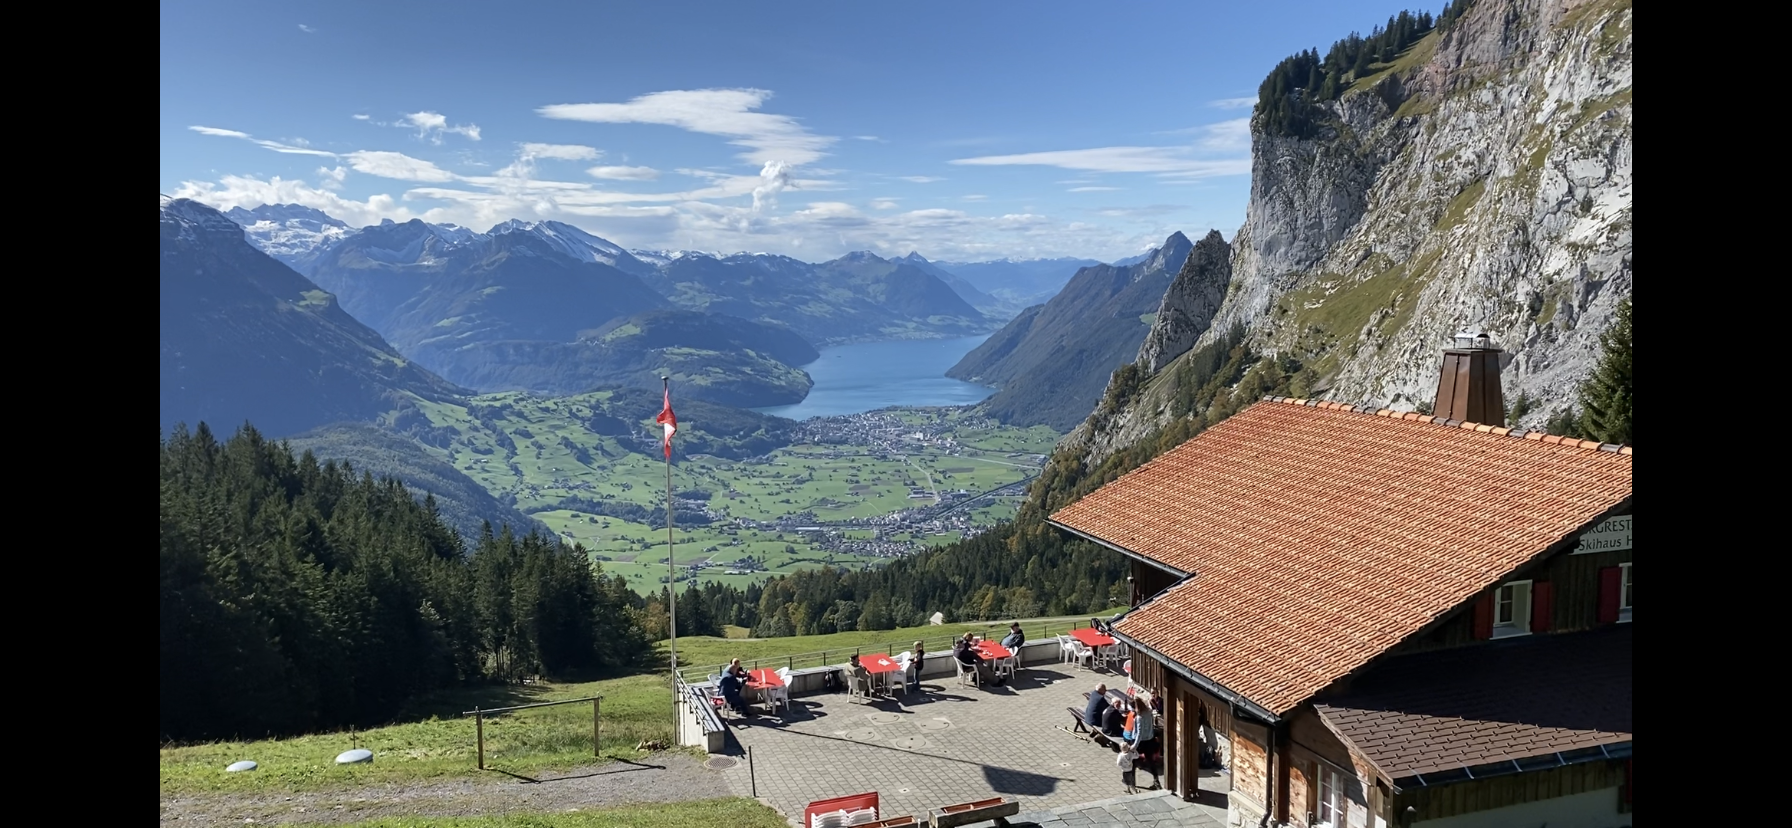 Switzerland – The safest haven from the Covid storm